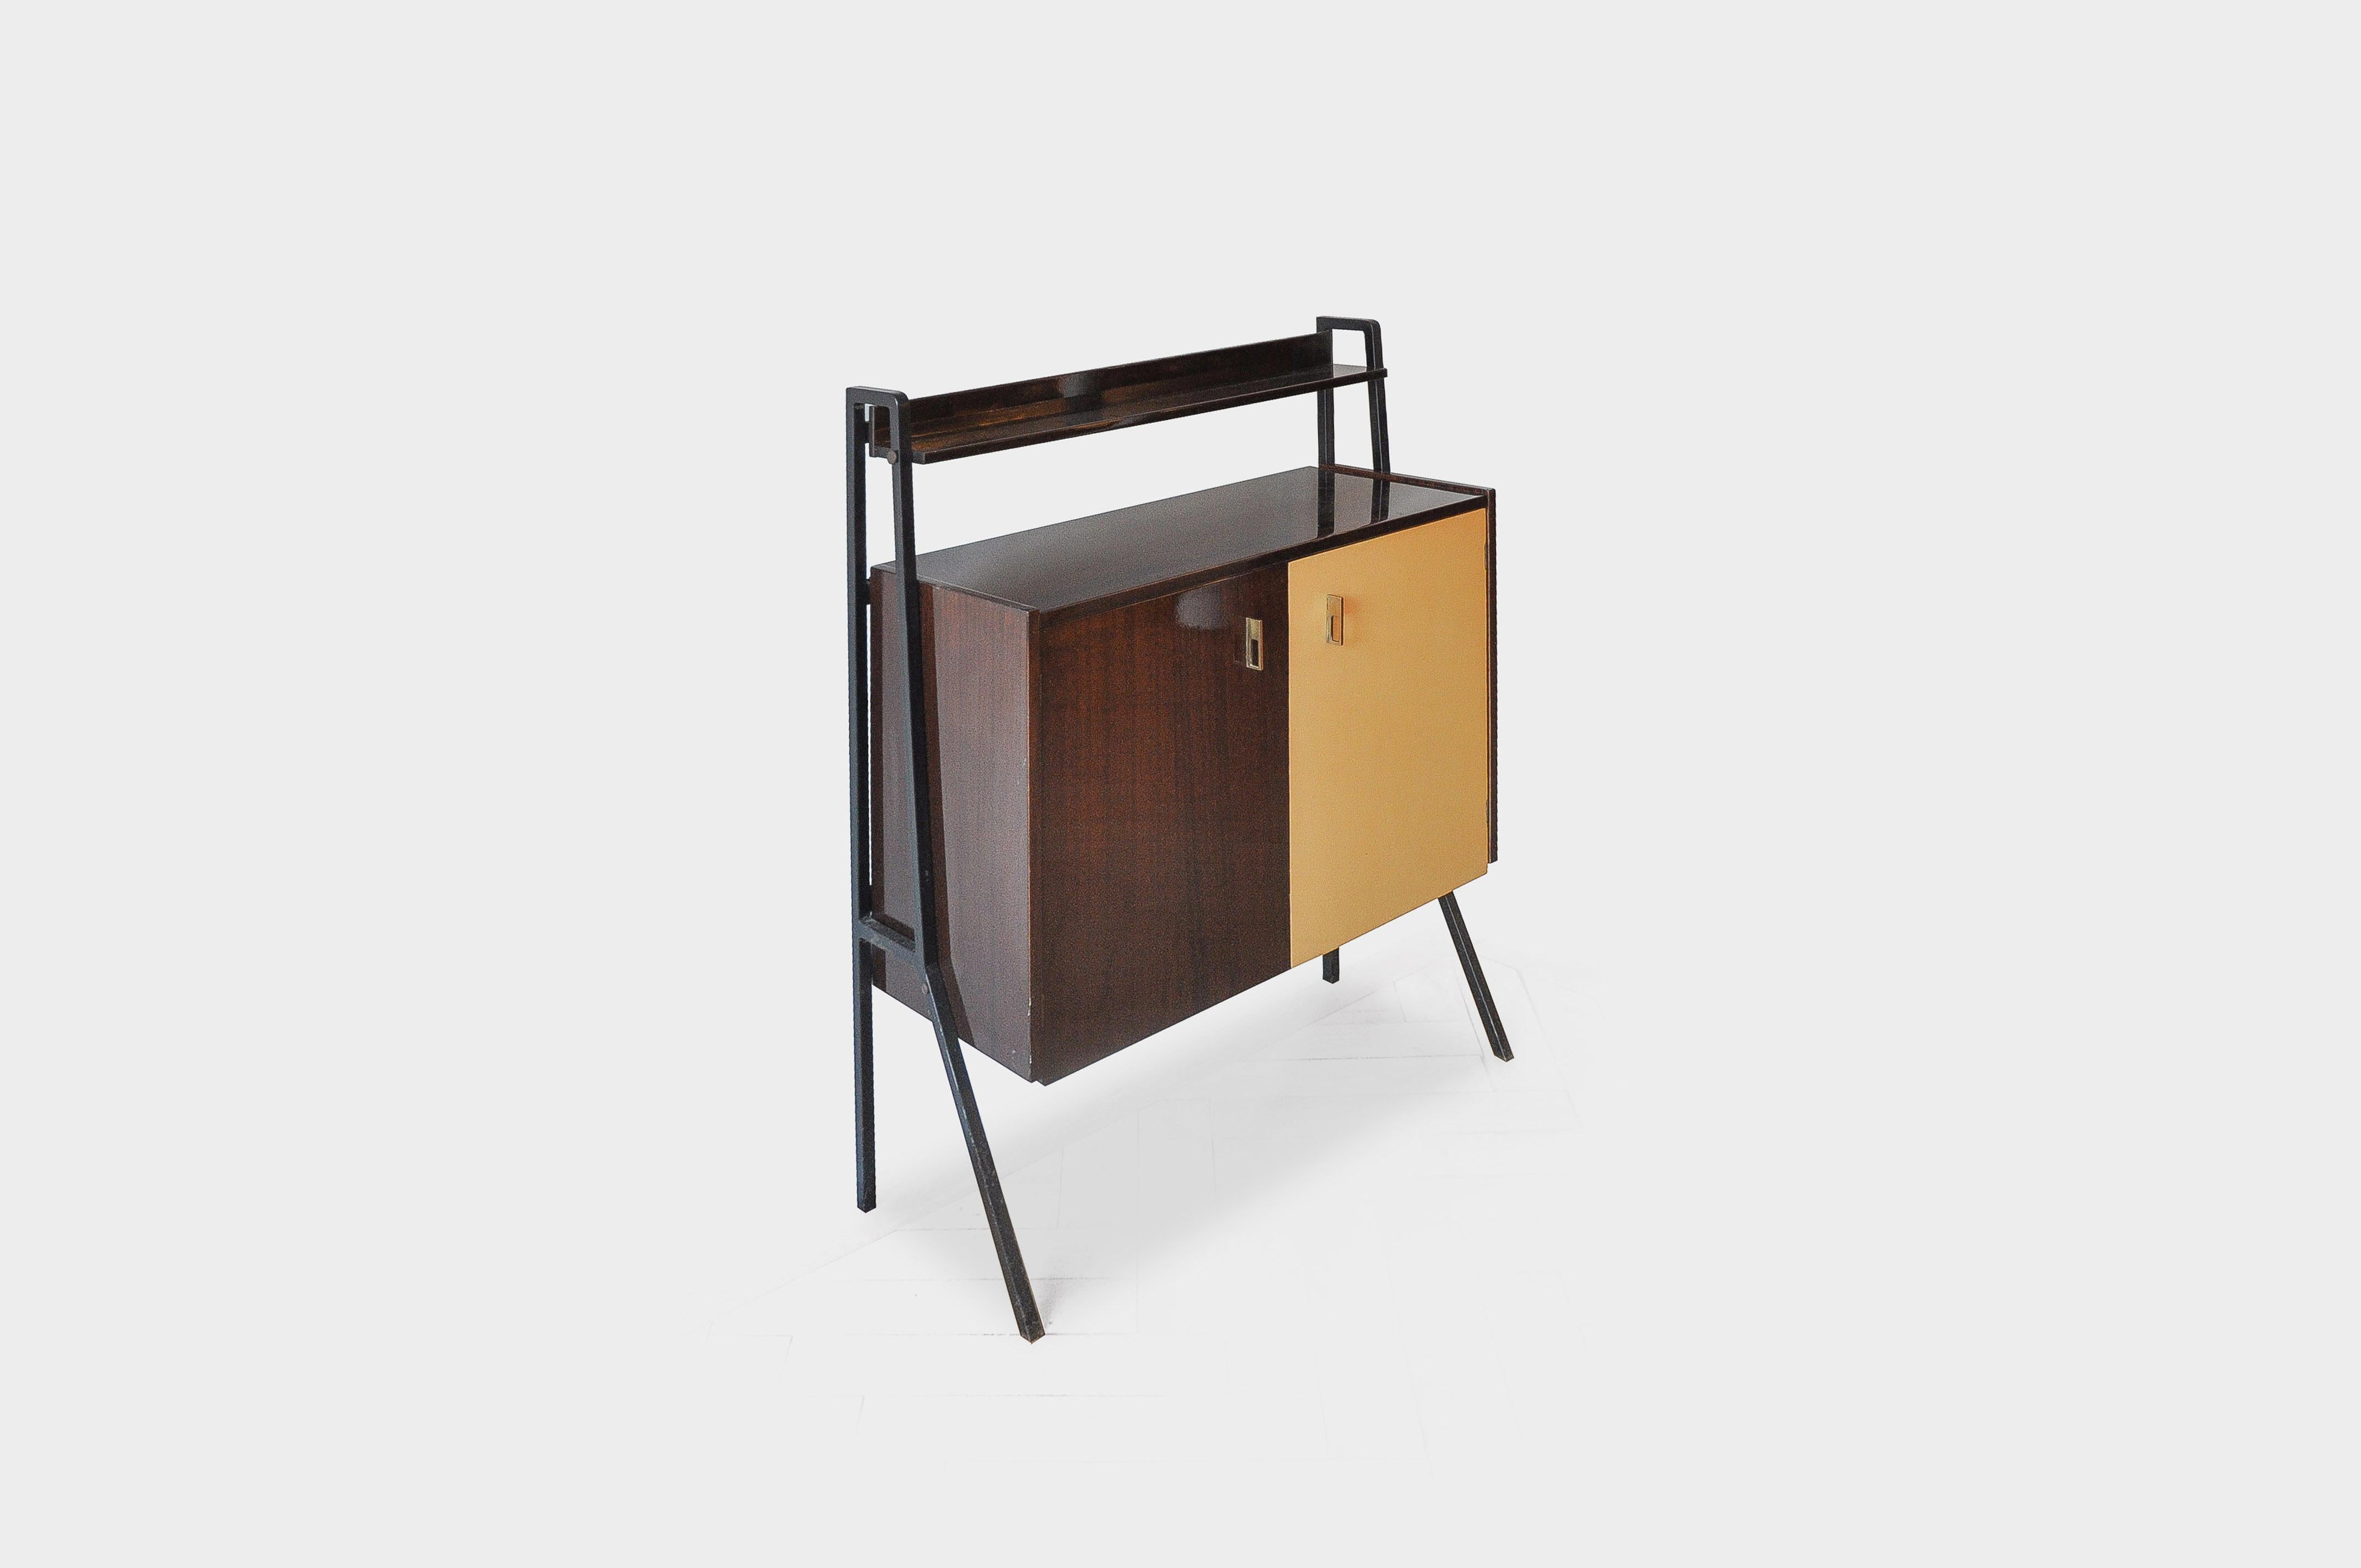 Two-colored Italian bar furniture from the 1960s, in the style of Gio Ponti. Mirrored interior with illuminated minibar, interesting brass door handles and a body of high-gloss varnished rosewood veneer. The frame is made of black square steel and